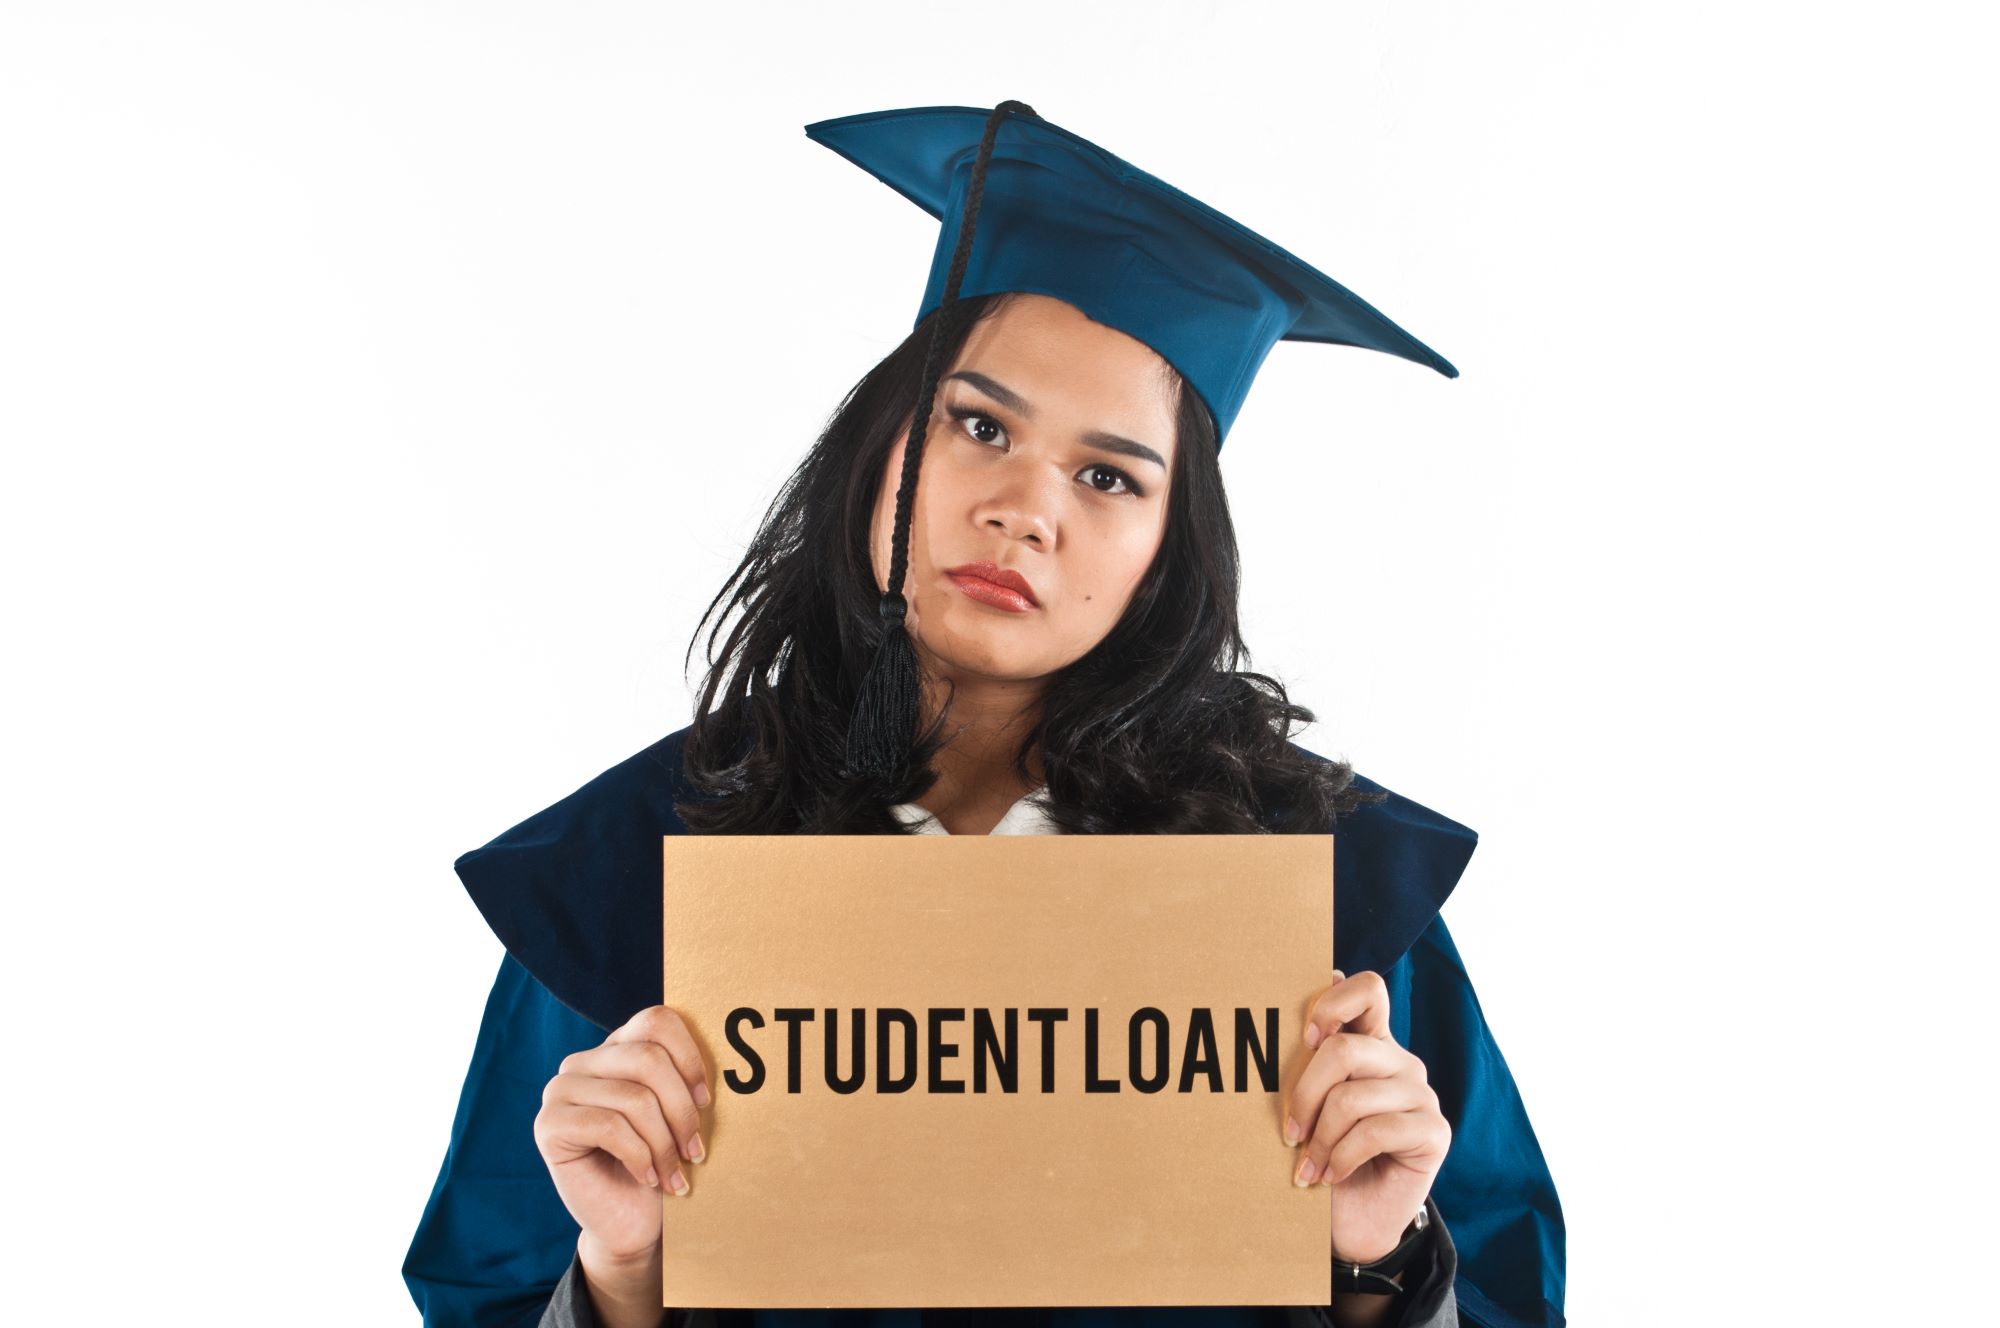 A young lady holding a sign of student loan debt